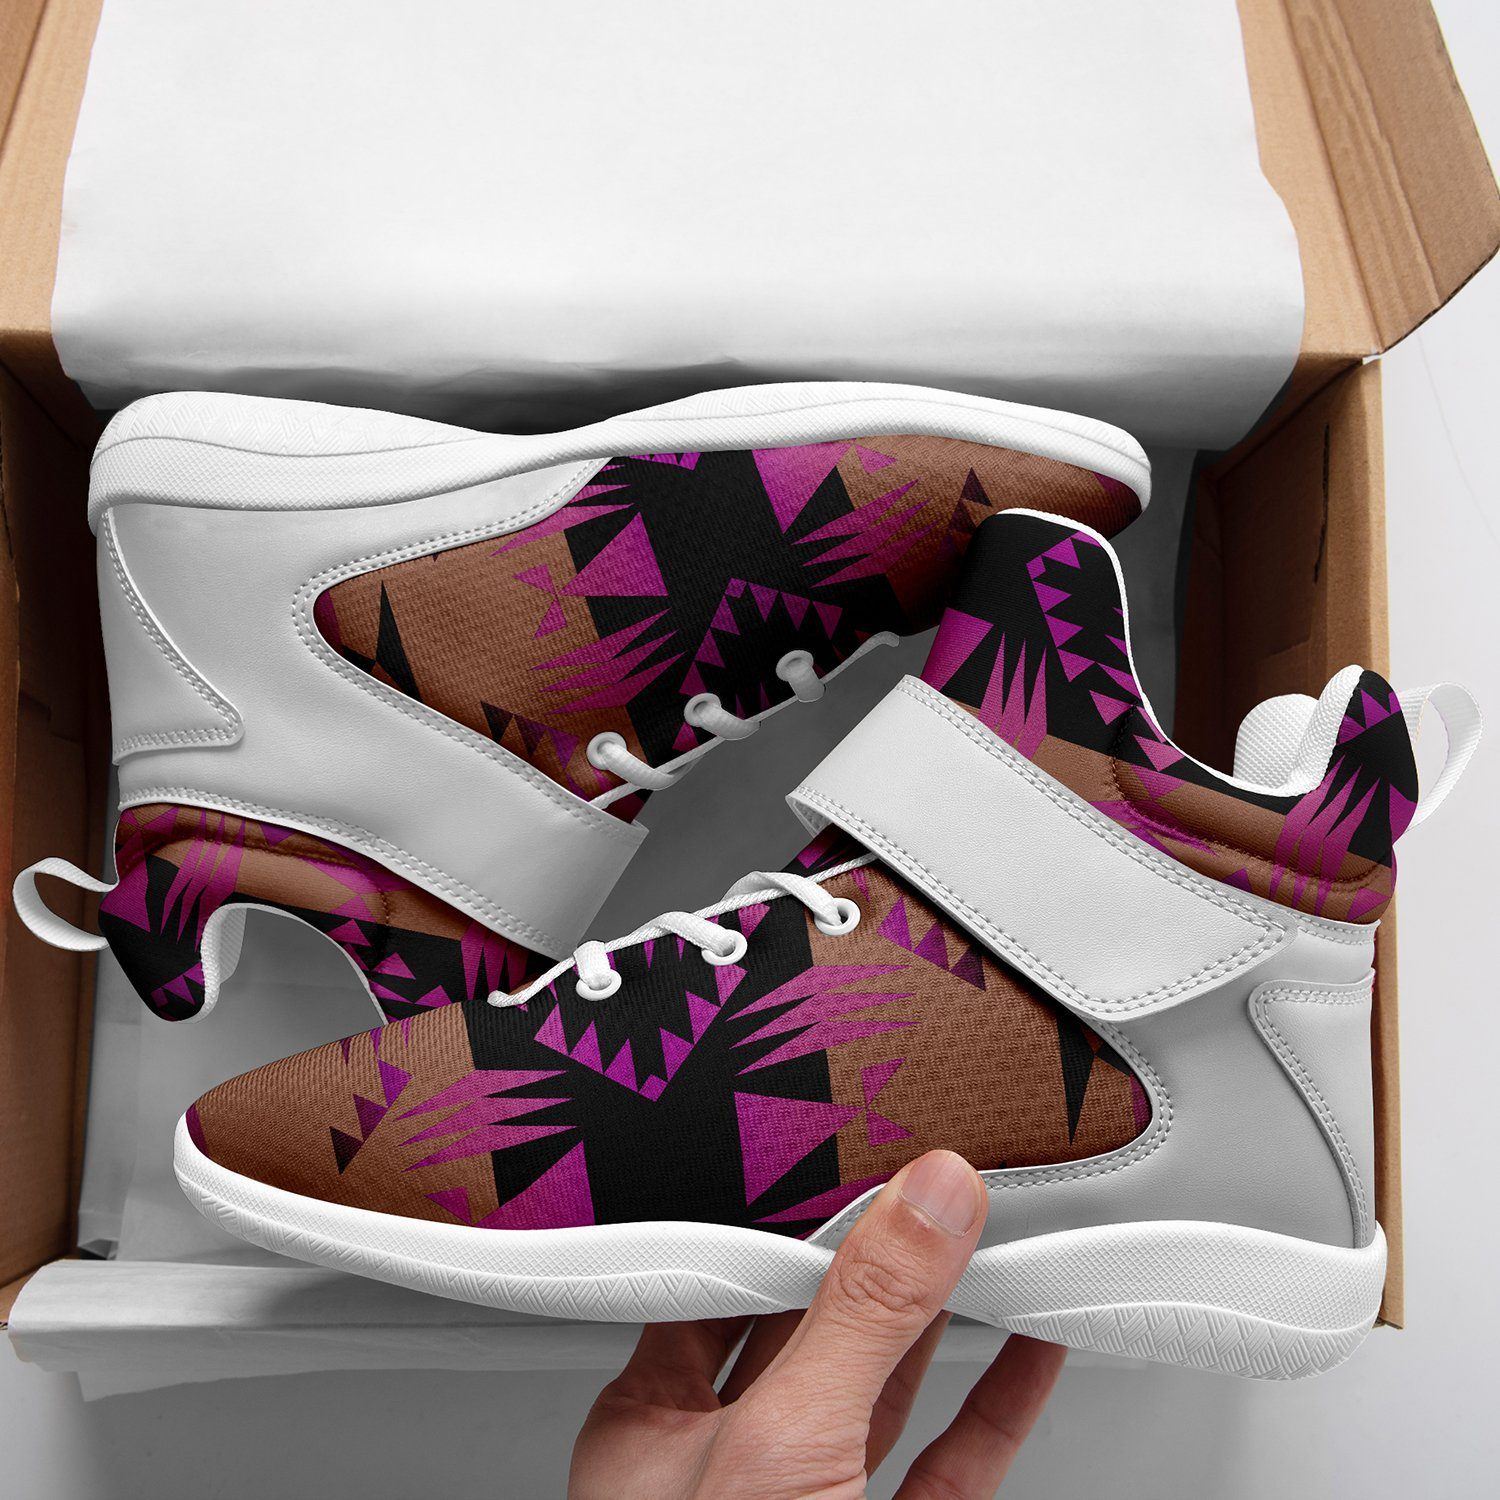 Between the Mountains Berry Ipottaa Basketball / Sport High Top Shoes - White Sole 49 Dzine 